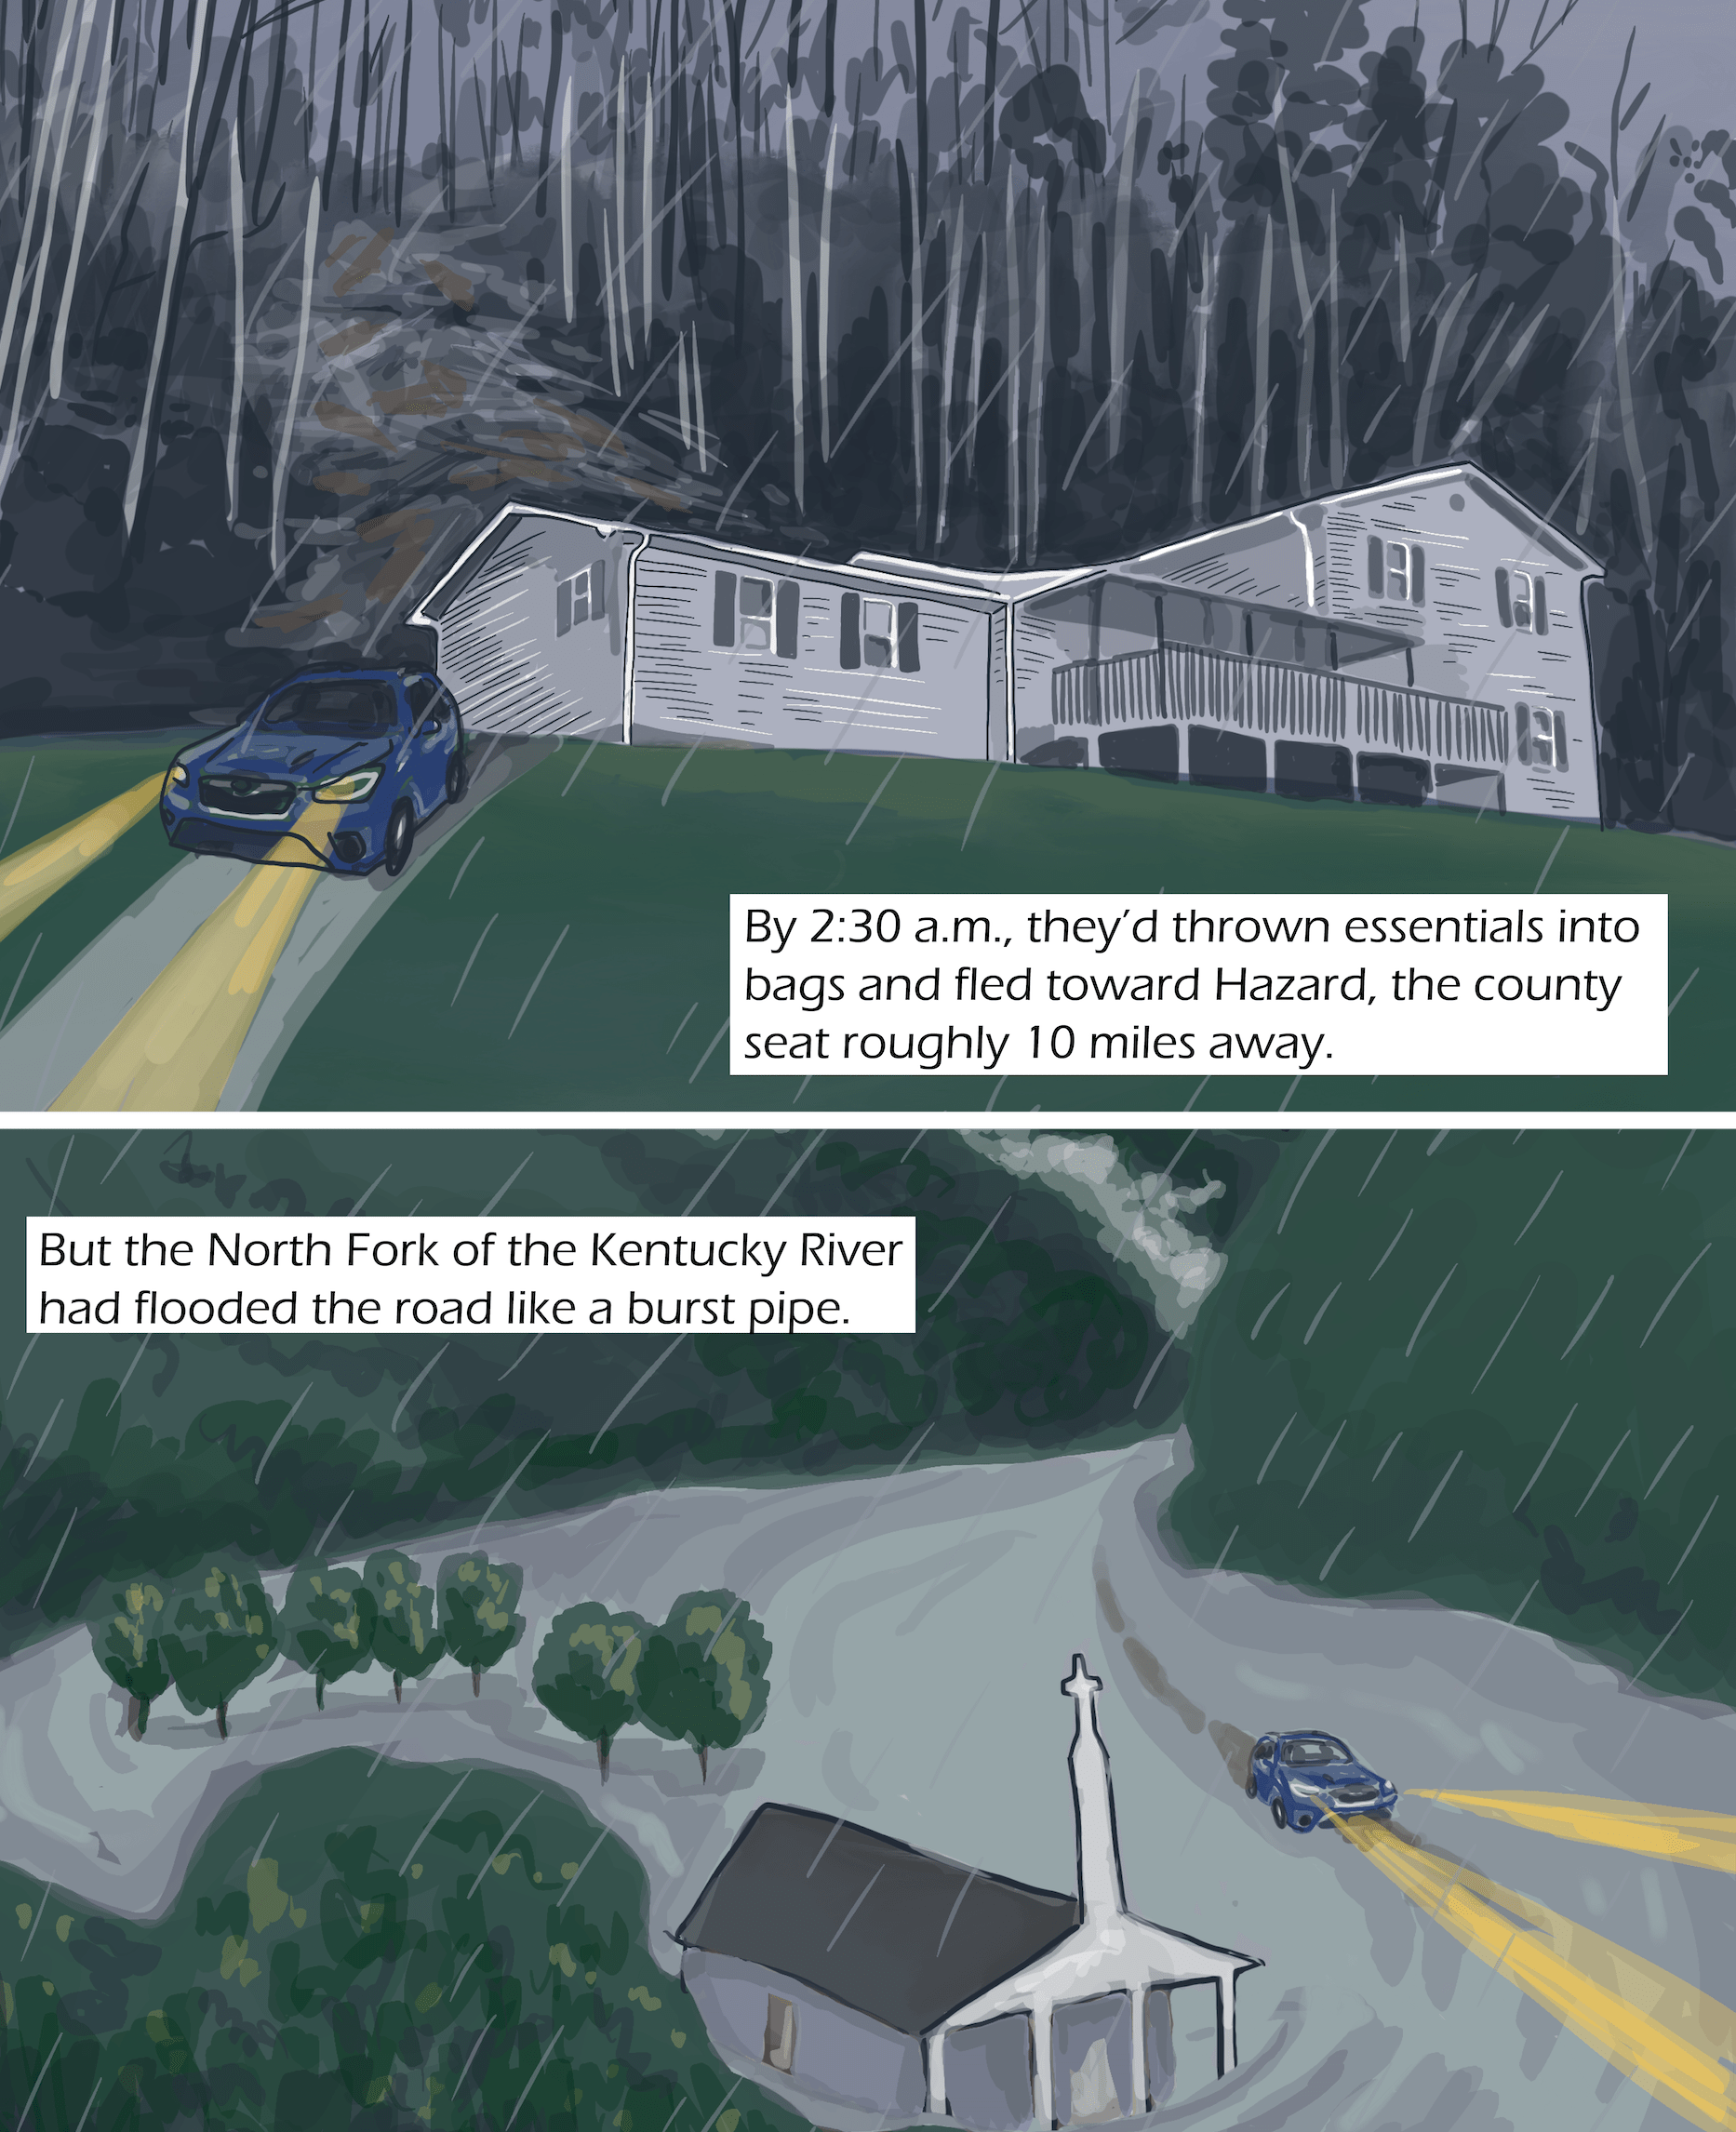 Top image shows a blue car drives away from a house in the woods. It is raining and the headlights are on. Text: By 2:30 a.m., they’d thrown essentials into bags and fled toward Hazard, the county seat roughly 10 miles away. Bottom image: The same car drives by a church and trees. It is rainy and the community is flooded. Text: But the North Fork of the Kentucky River had flooded the road like a burst pipe.